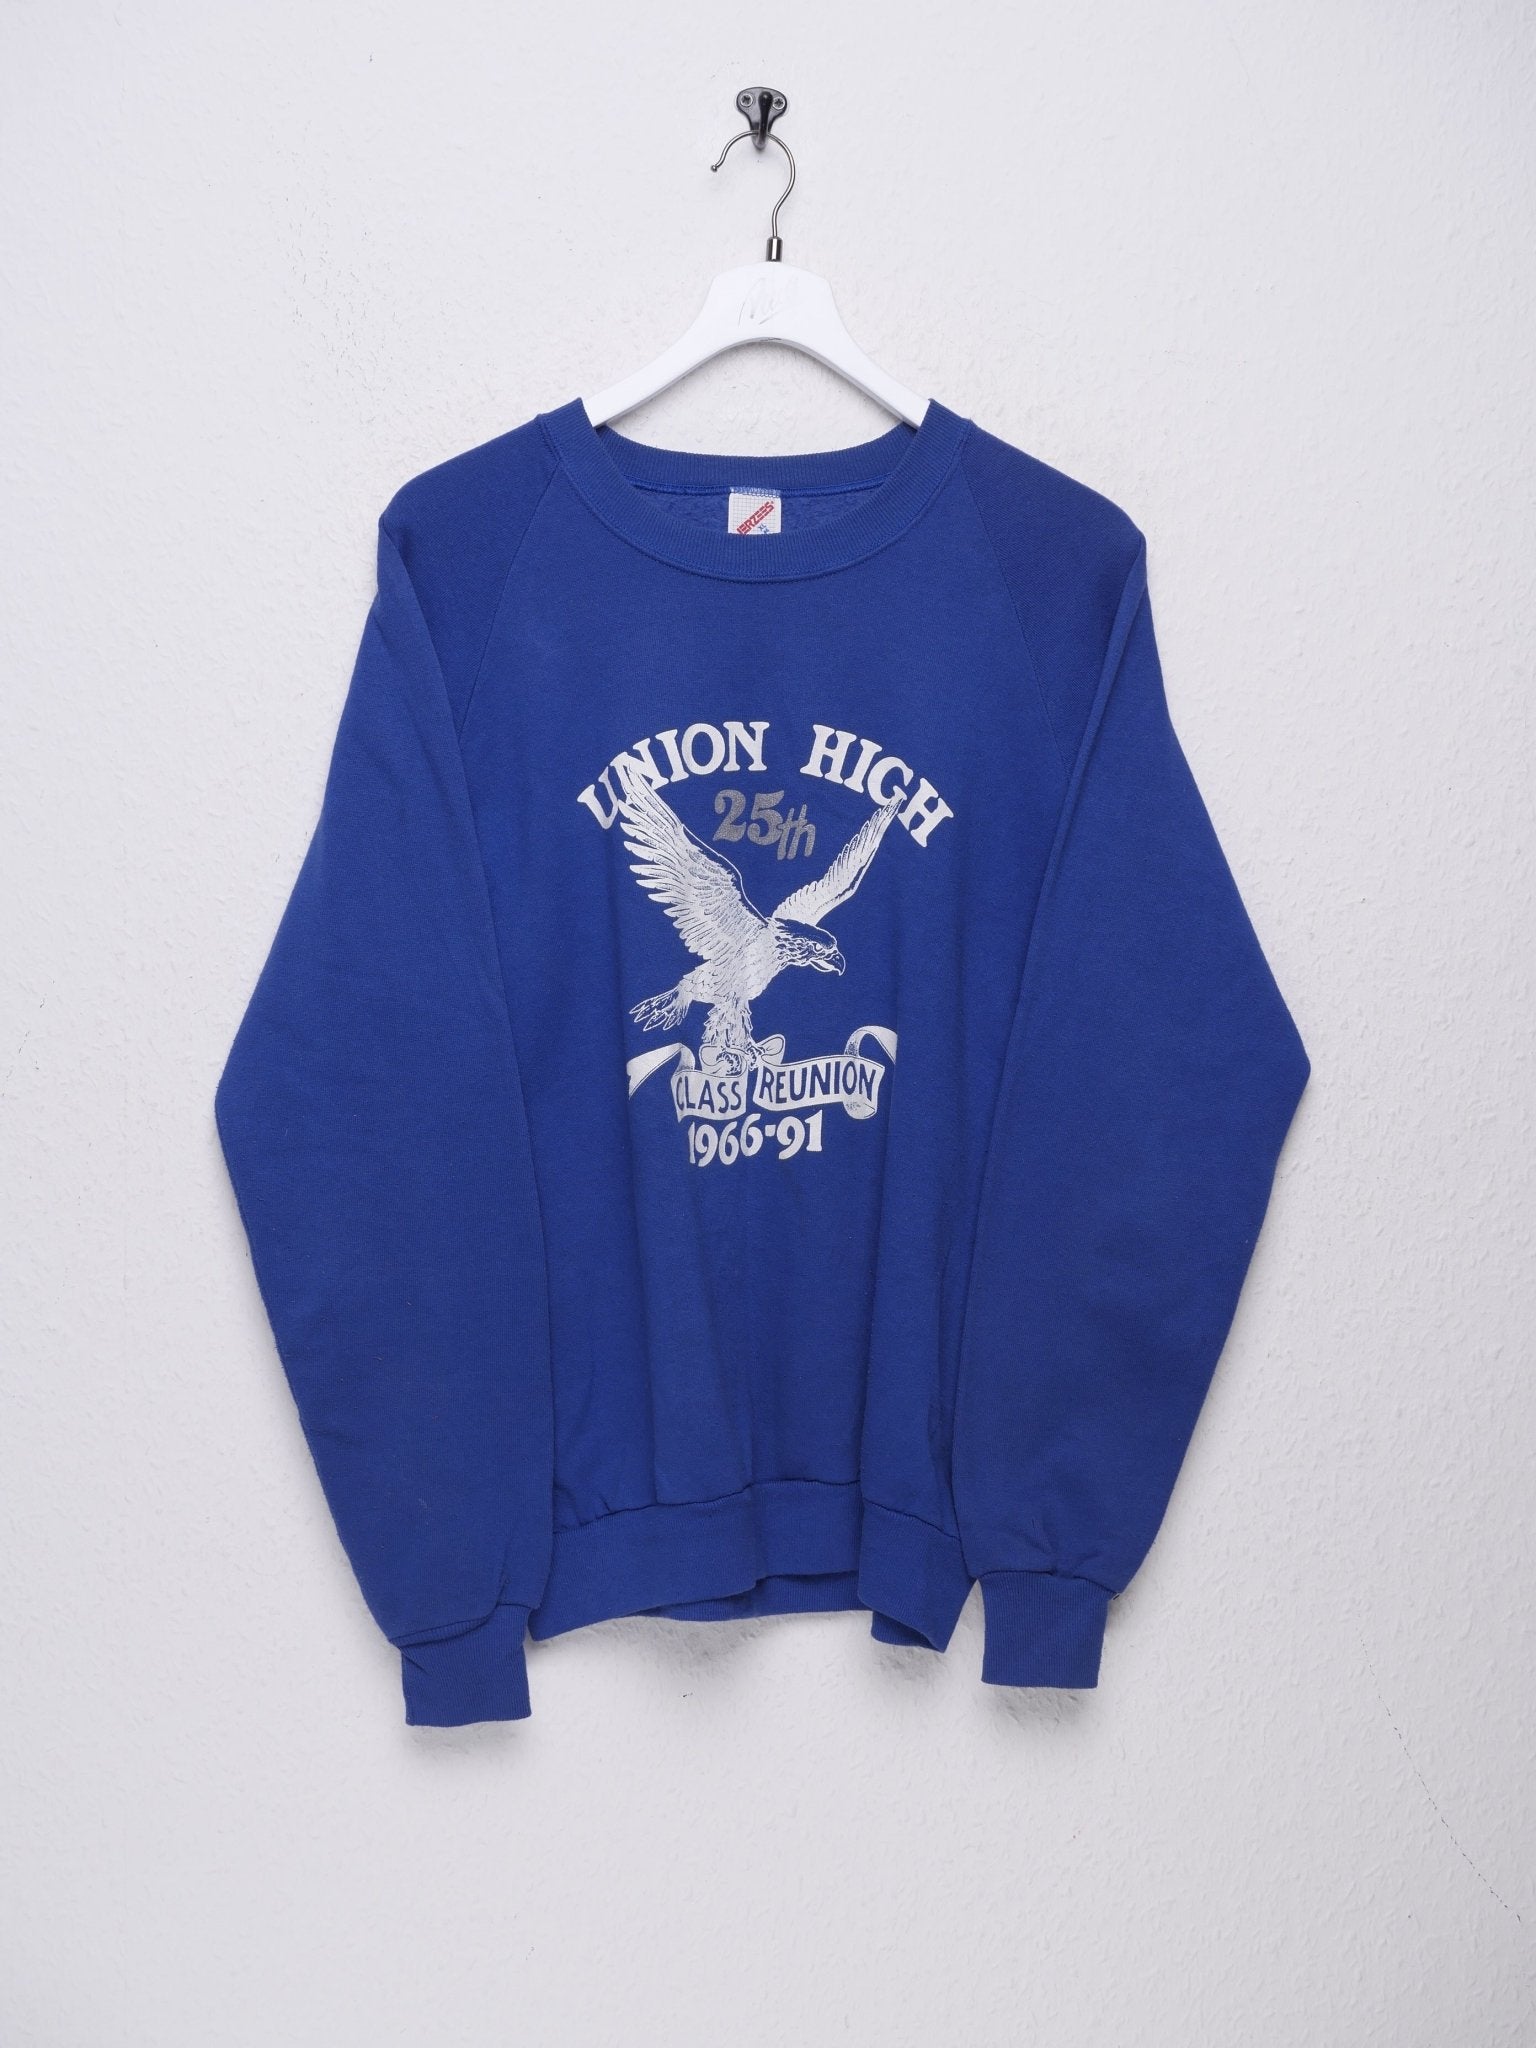 Union High 25th Class Reunion printed Graphic blue Sweater - Peeces